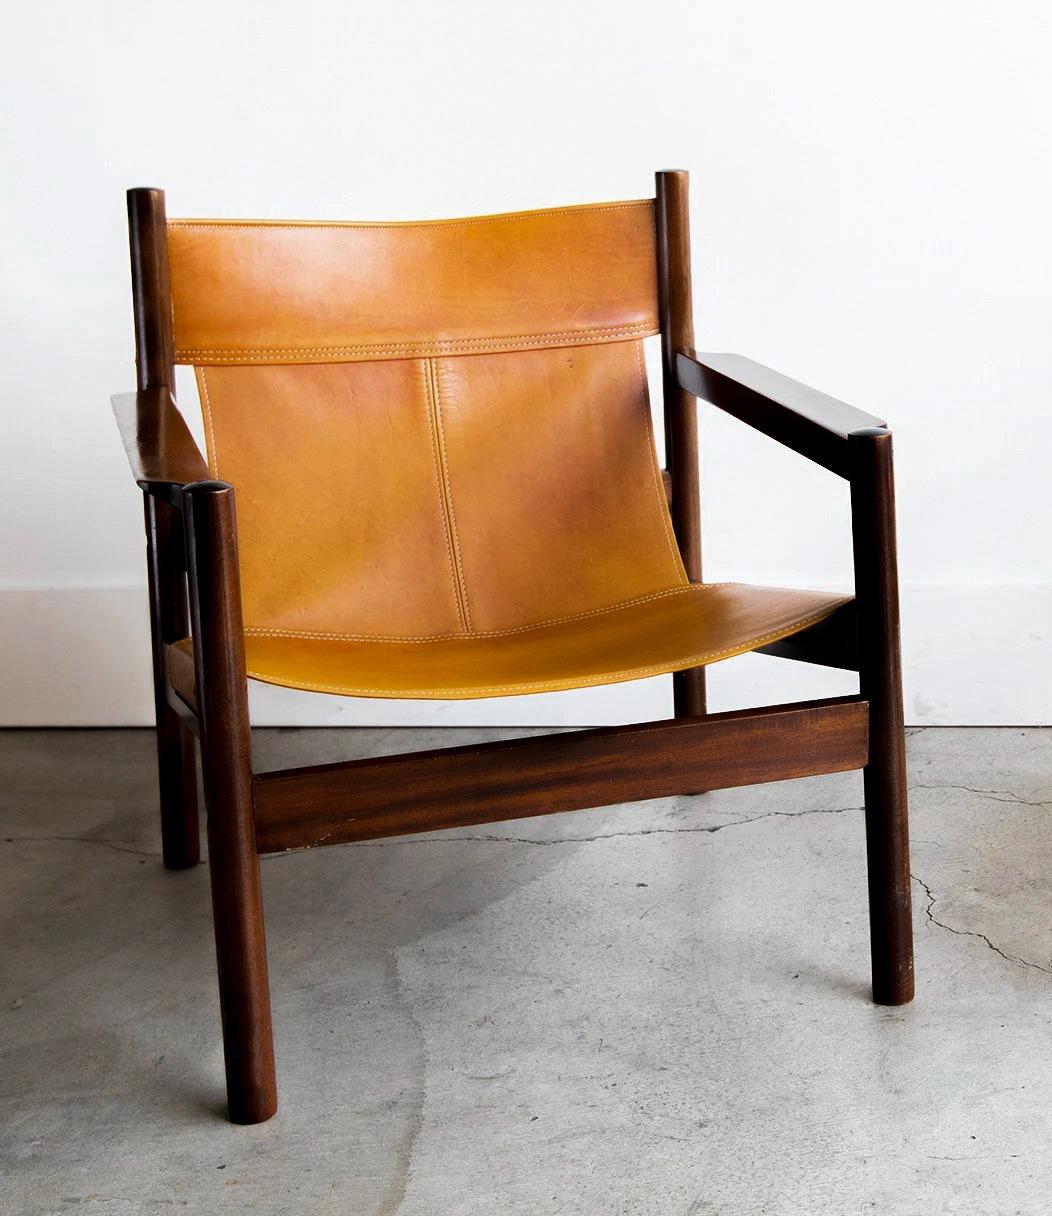 Roxinho vintage Safari armchairs in leather and wood by MCM Michel Arnoult, 1960s

A pair of truly amazing mid century Roxinho leather safari style lounge chairs by Michel Arnoult, circa 1960 Brazil. These chairs feature stitched high quality